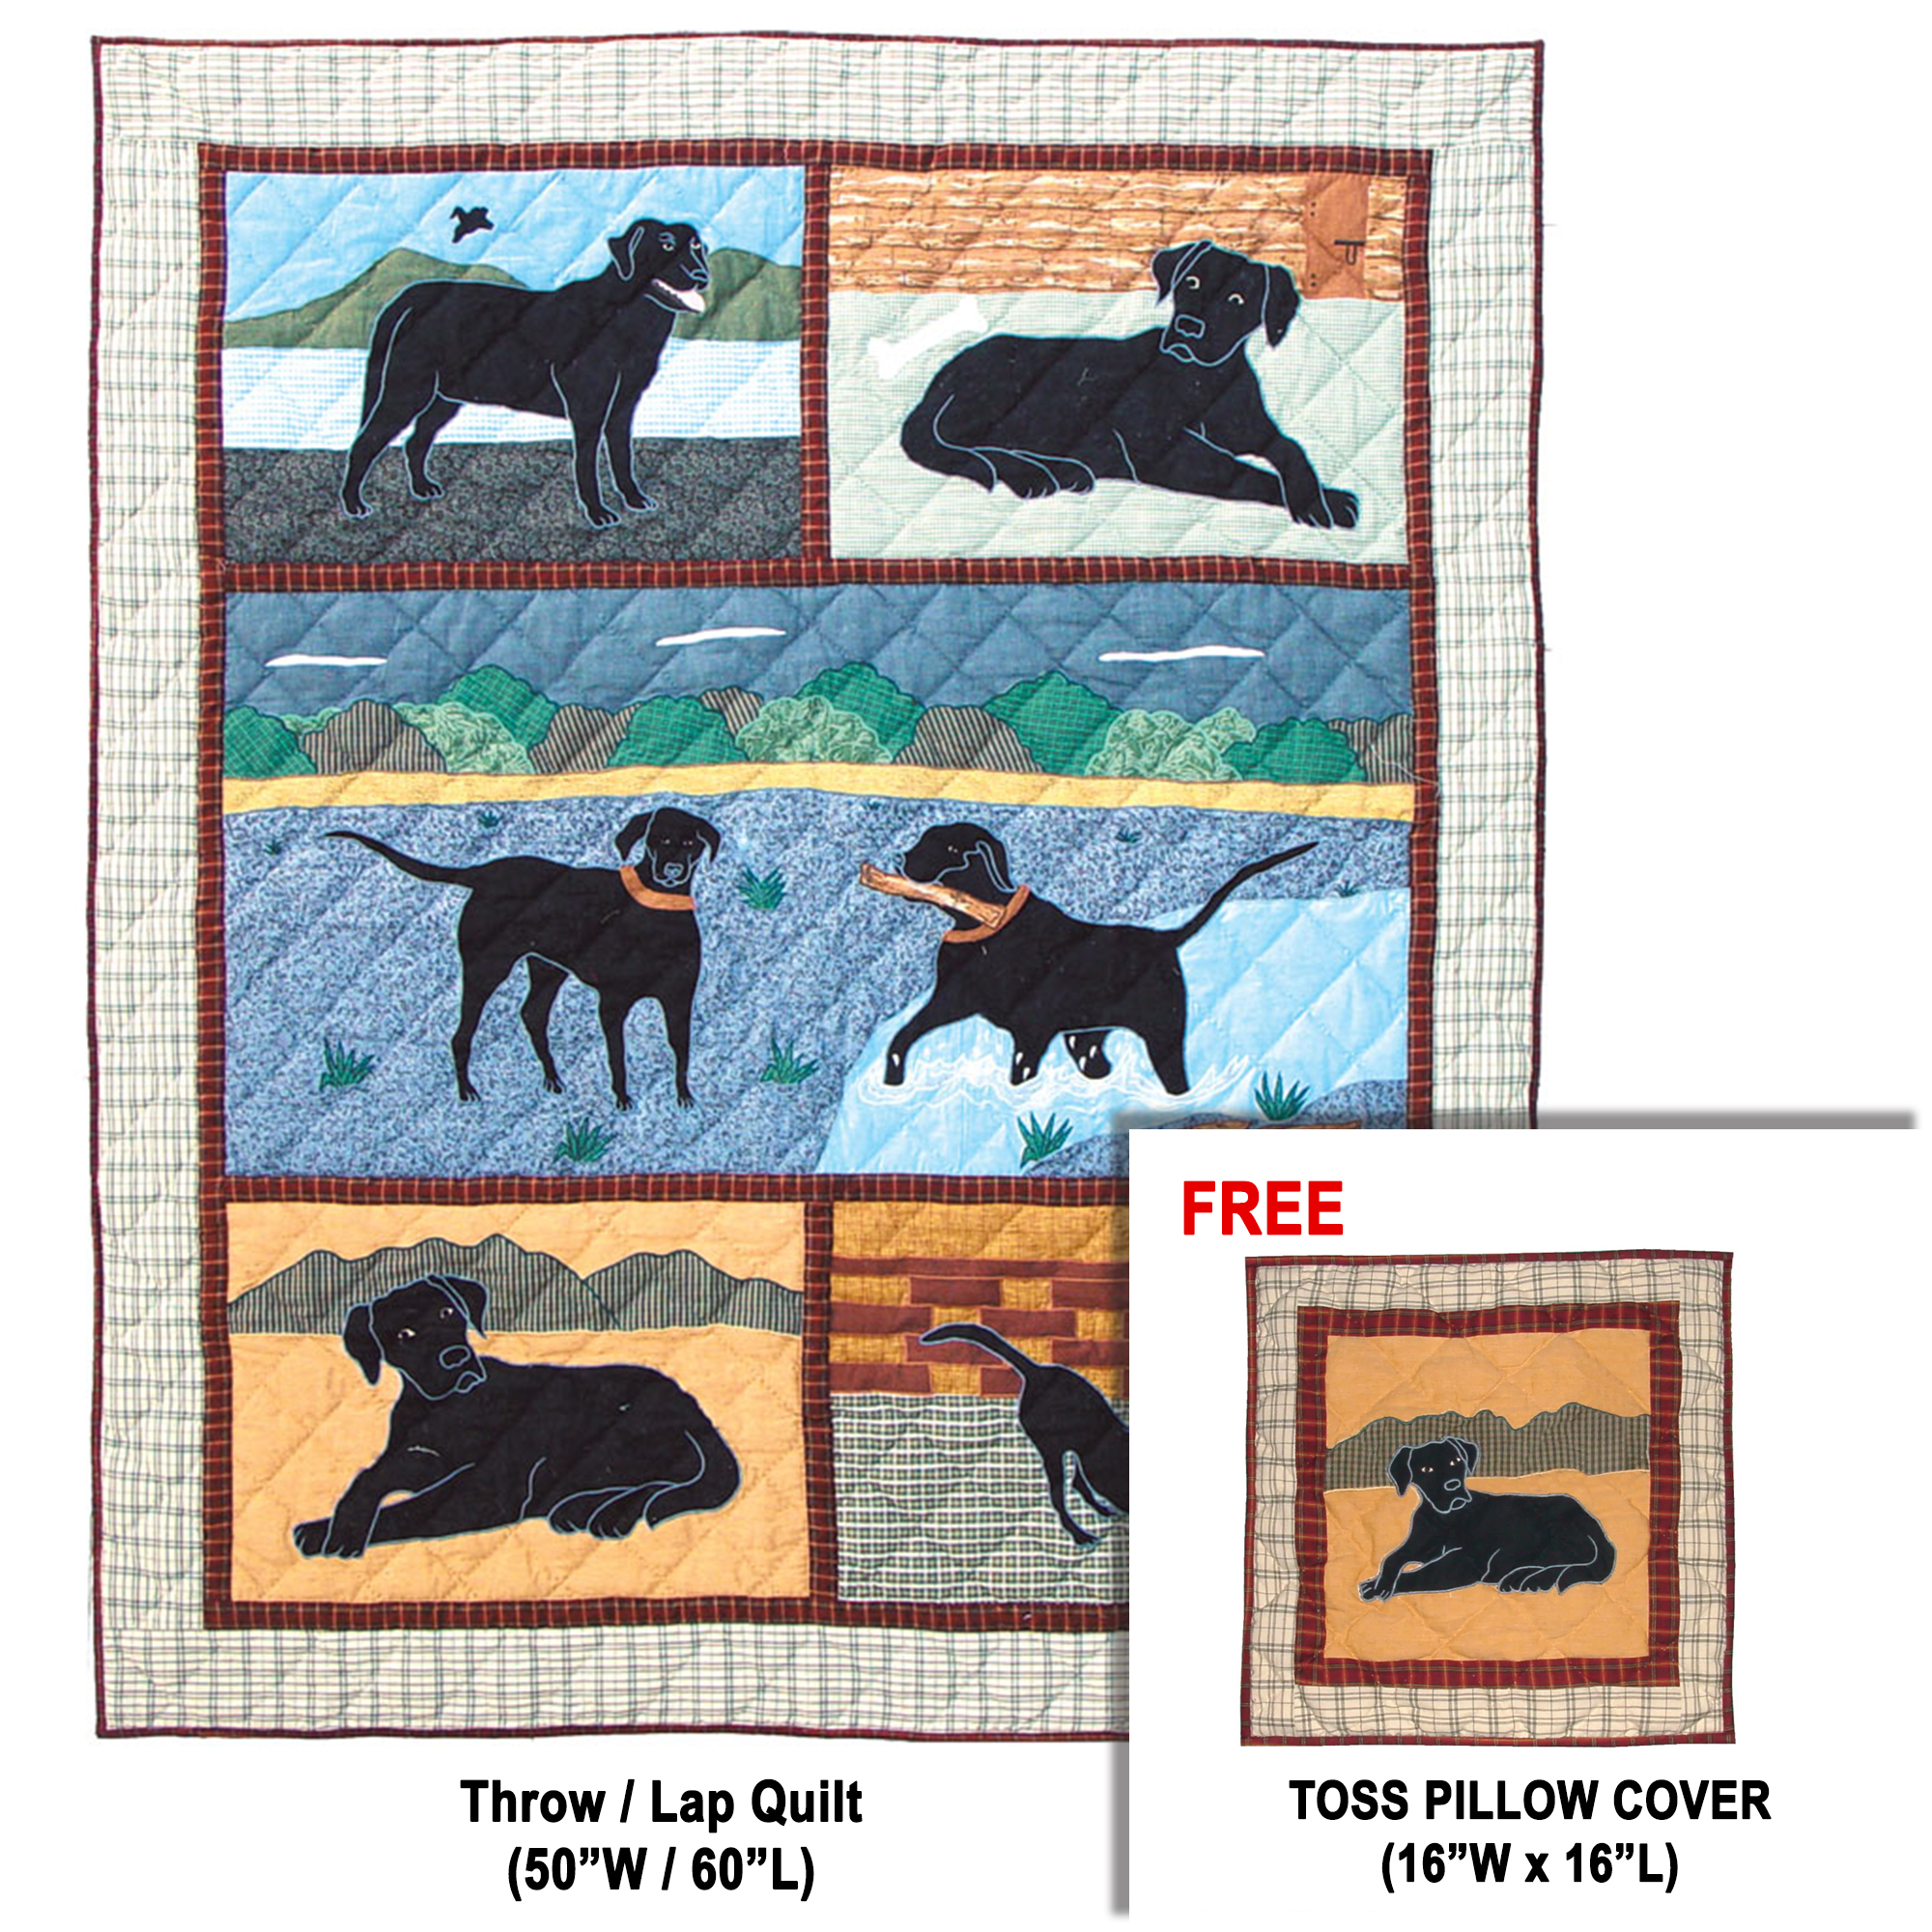 Black Lab Throw 50"W x 60"L | Buy a Throw / lap Quilt and Get a matching Toss Pillow Cover (16"W x 16"L) FREE